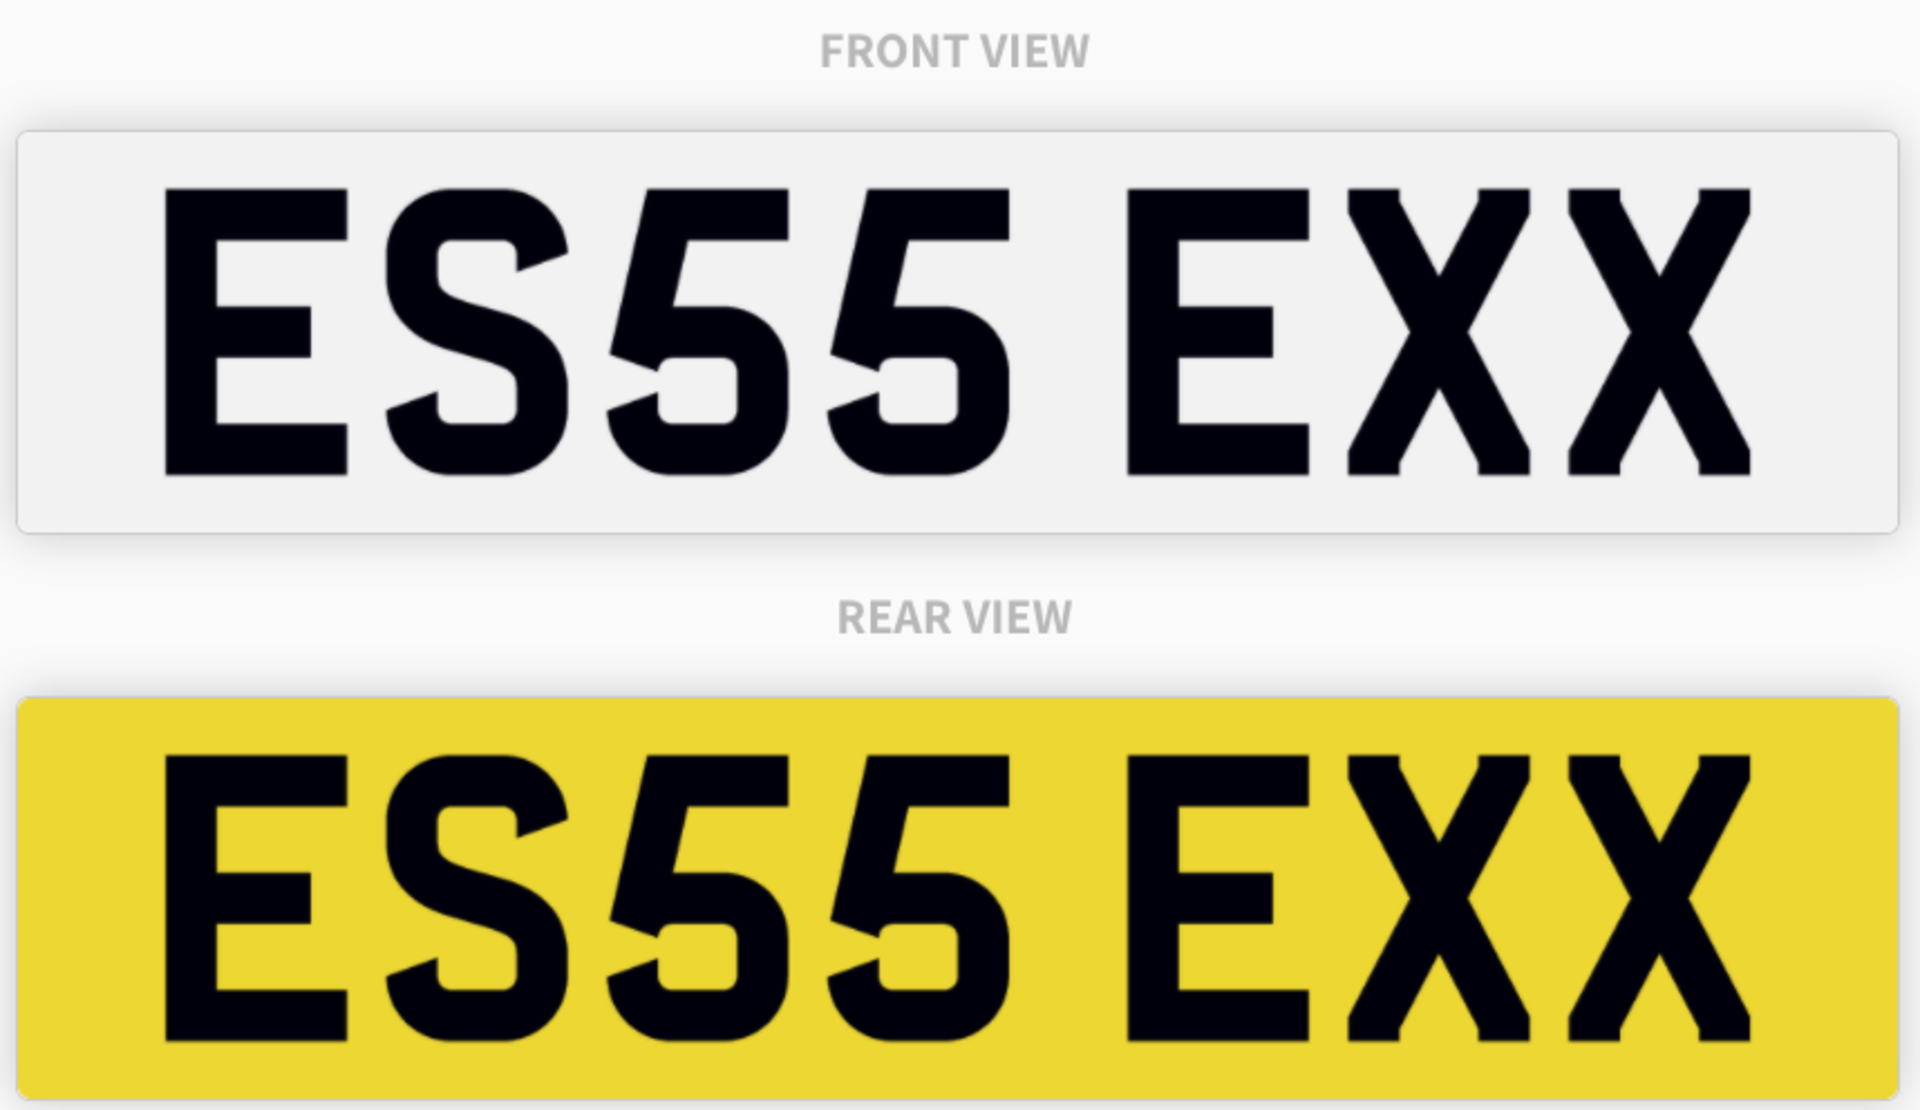 ES55 EXX , number plate on retention